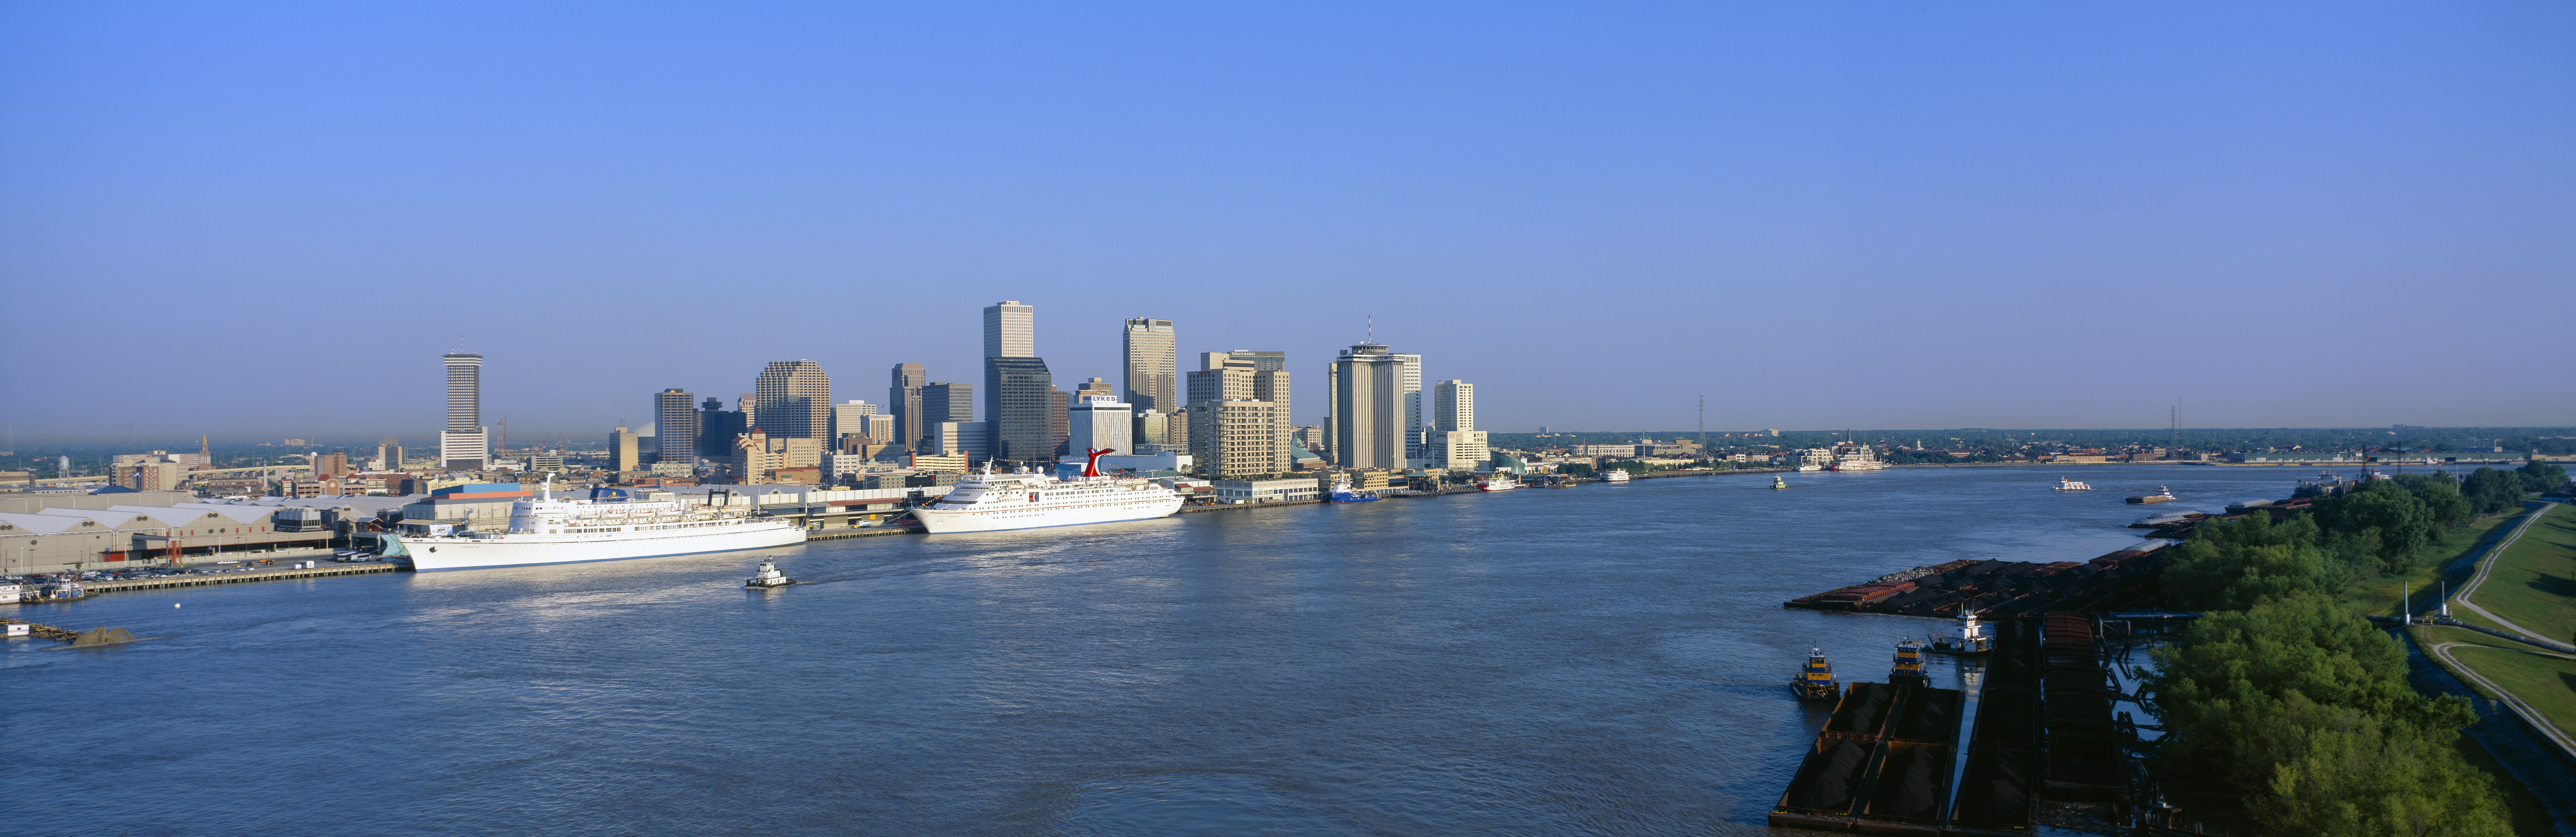 view of new orleans port